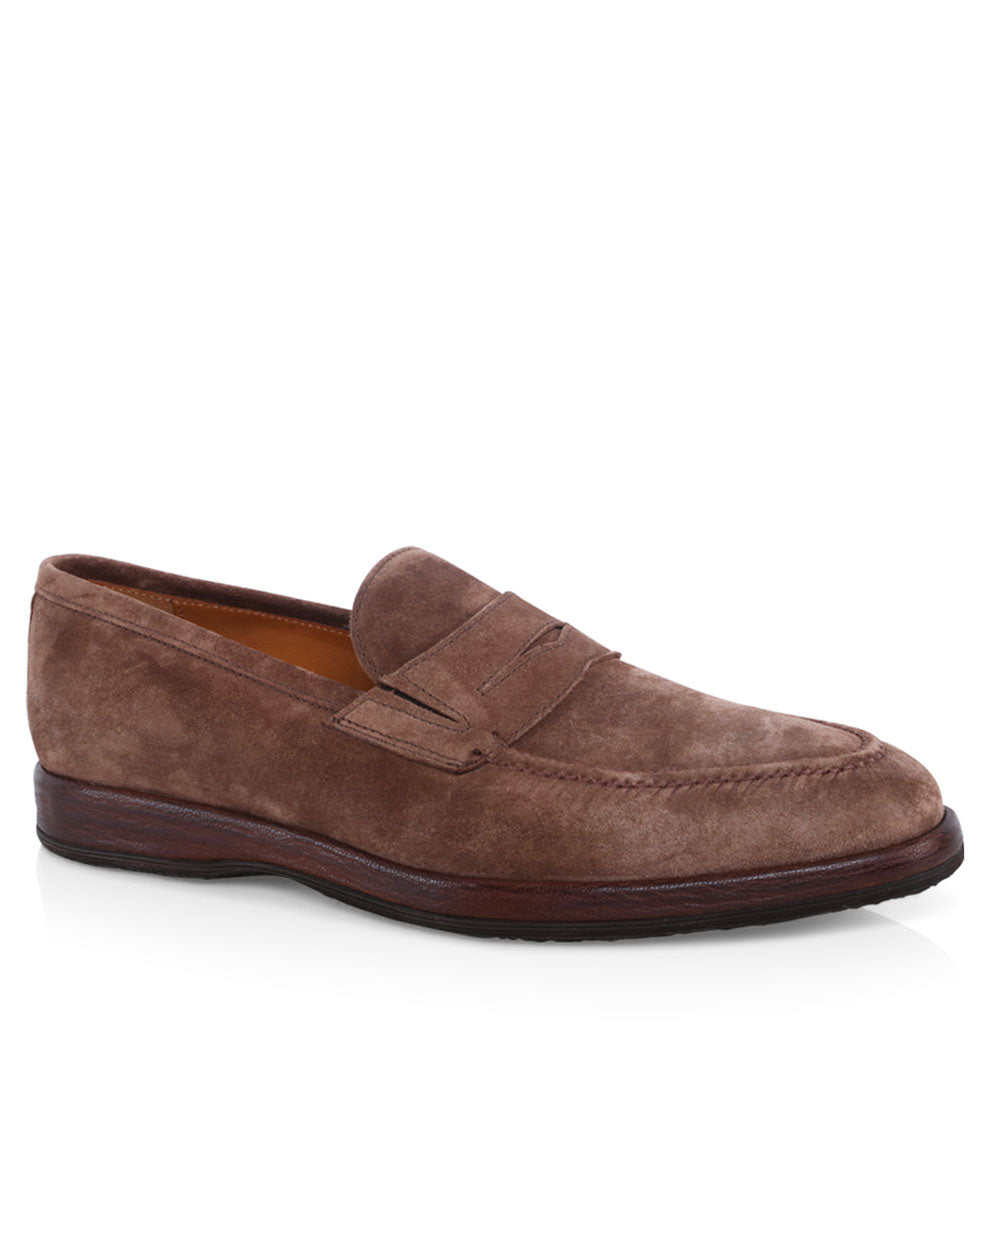 Suede Principe Penny Loafer in Light Orzo